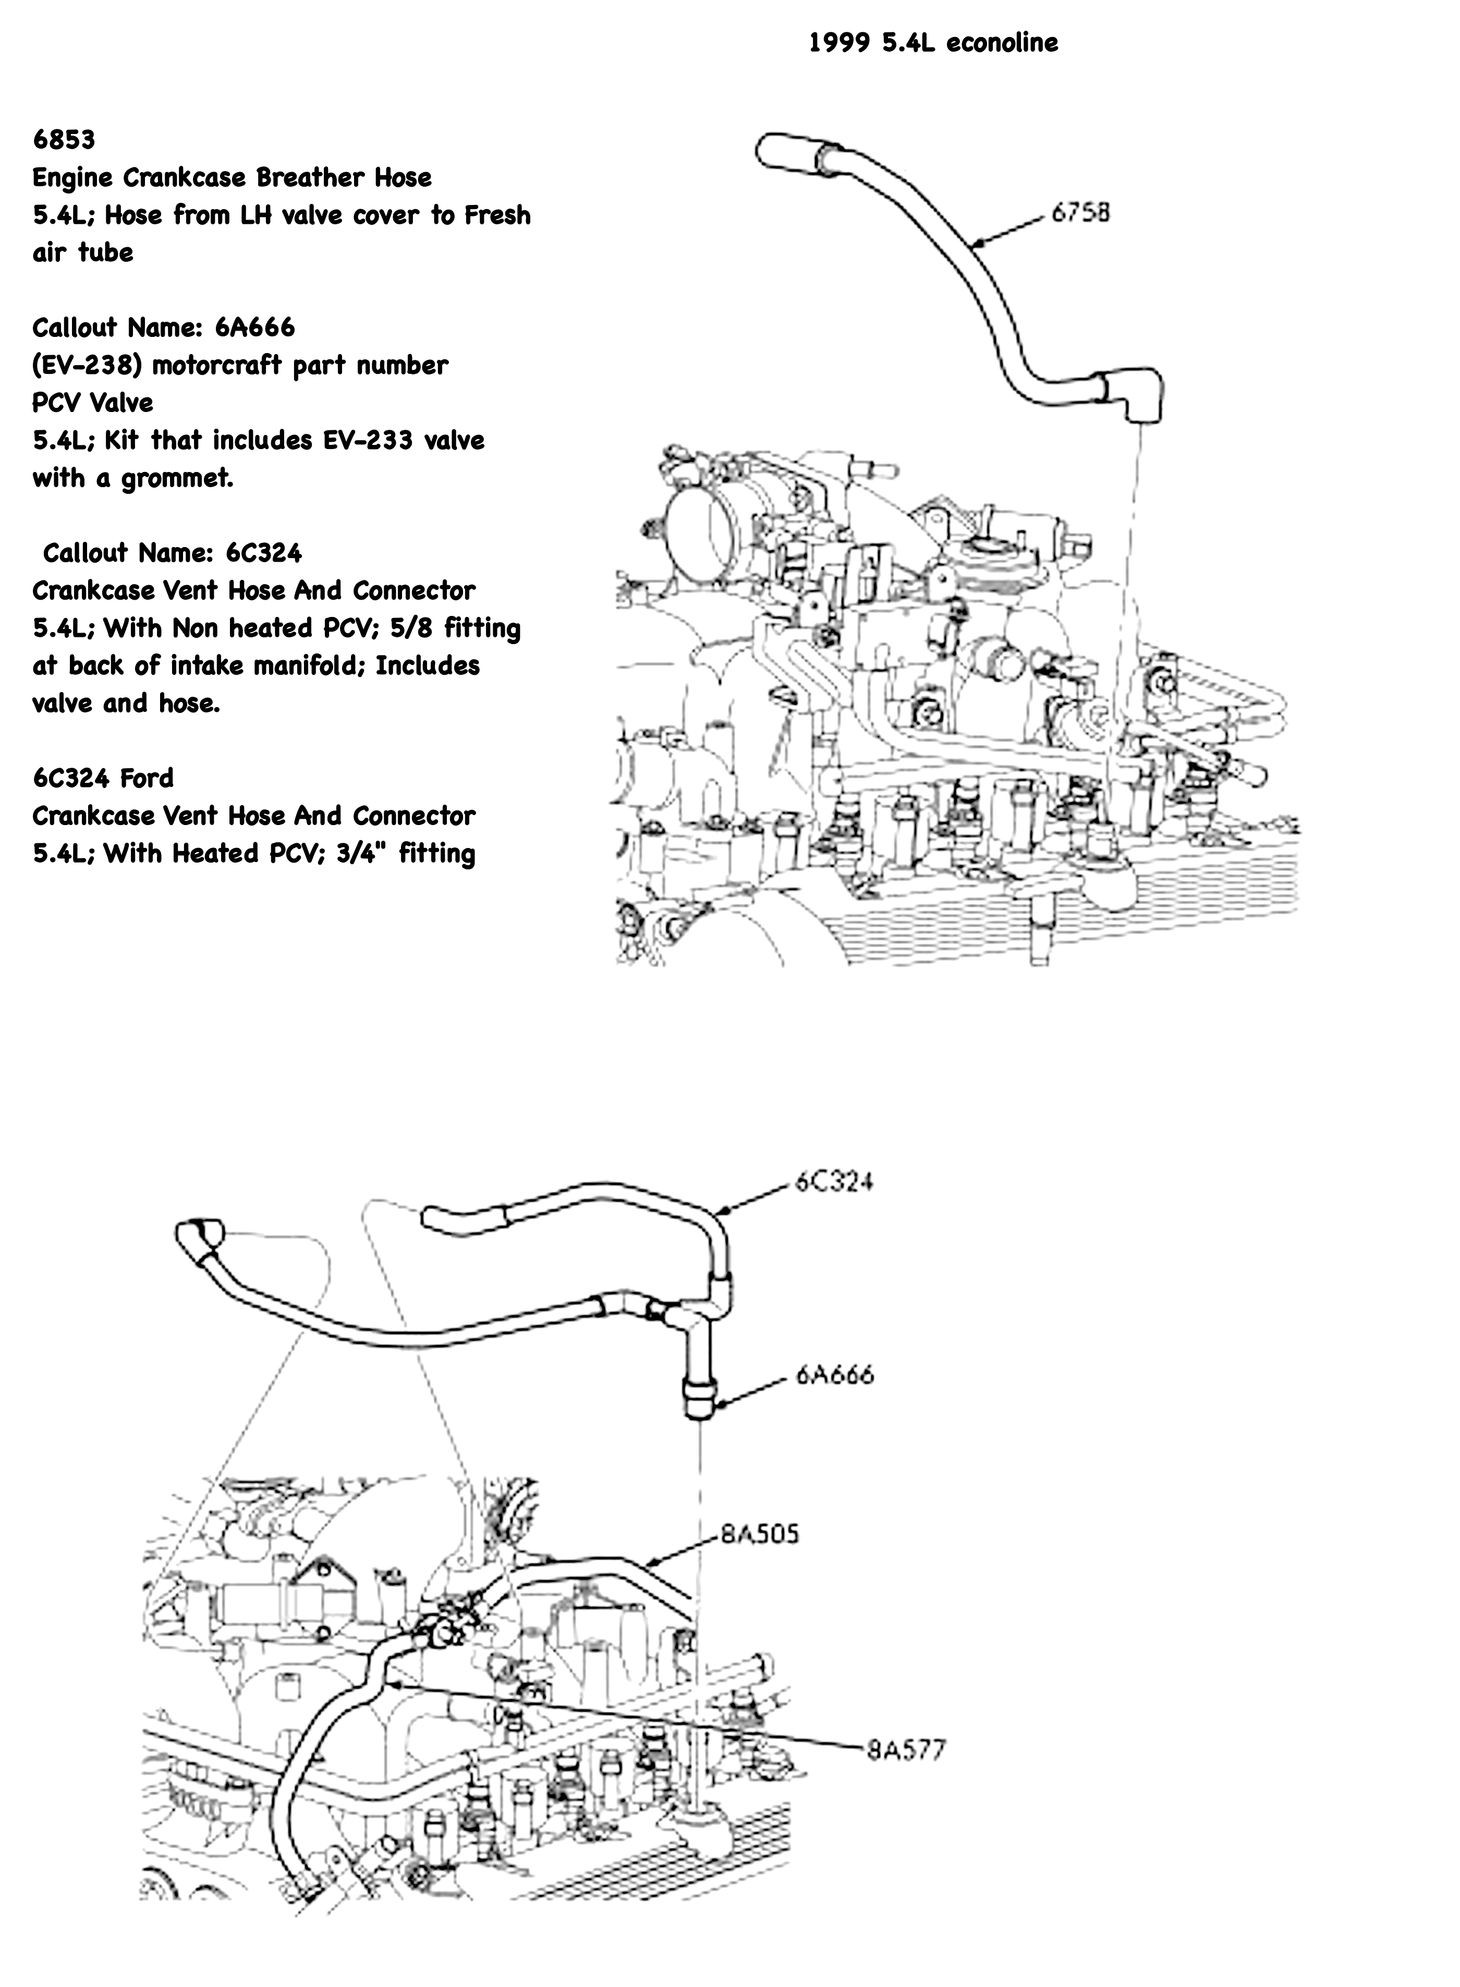 Pcv System Diagram Wrg 8679] 2003 ford Expedition 4 6 Engine Diagram Of Pcv System Diagram